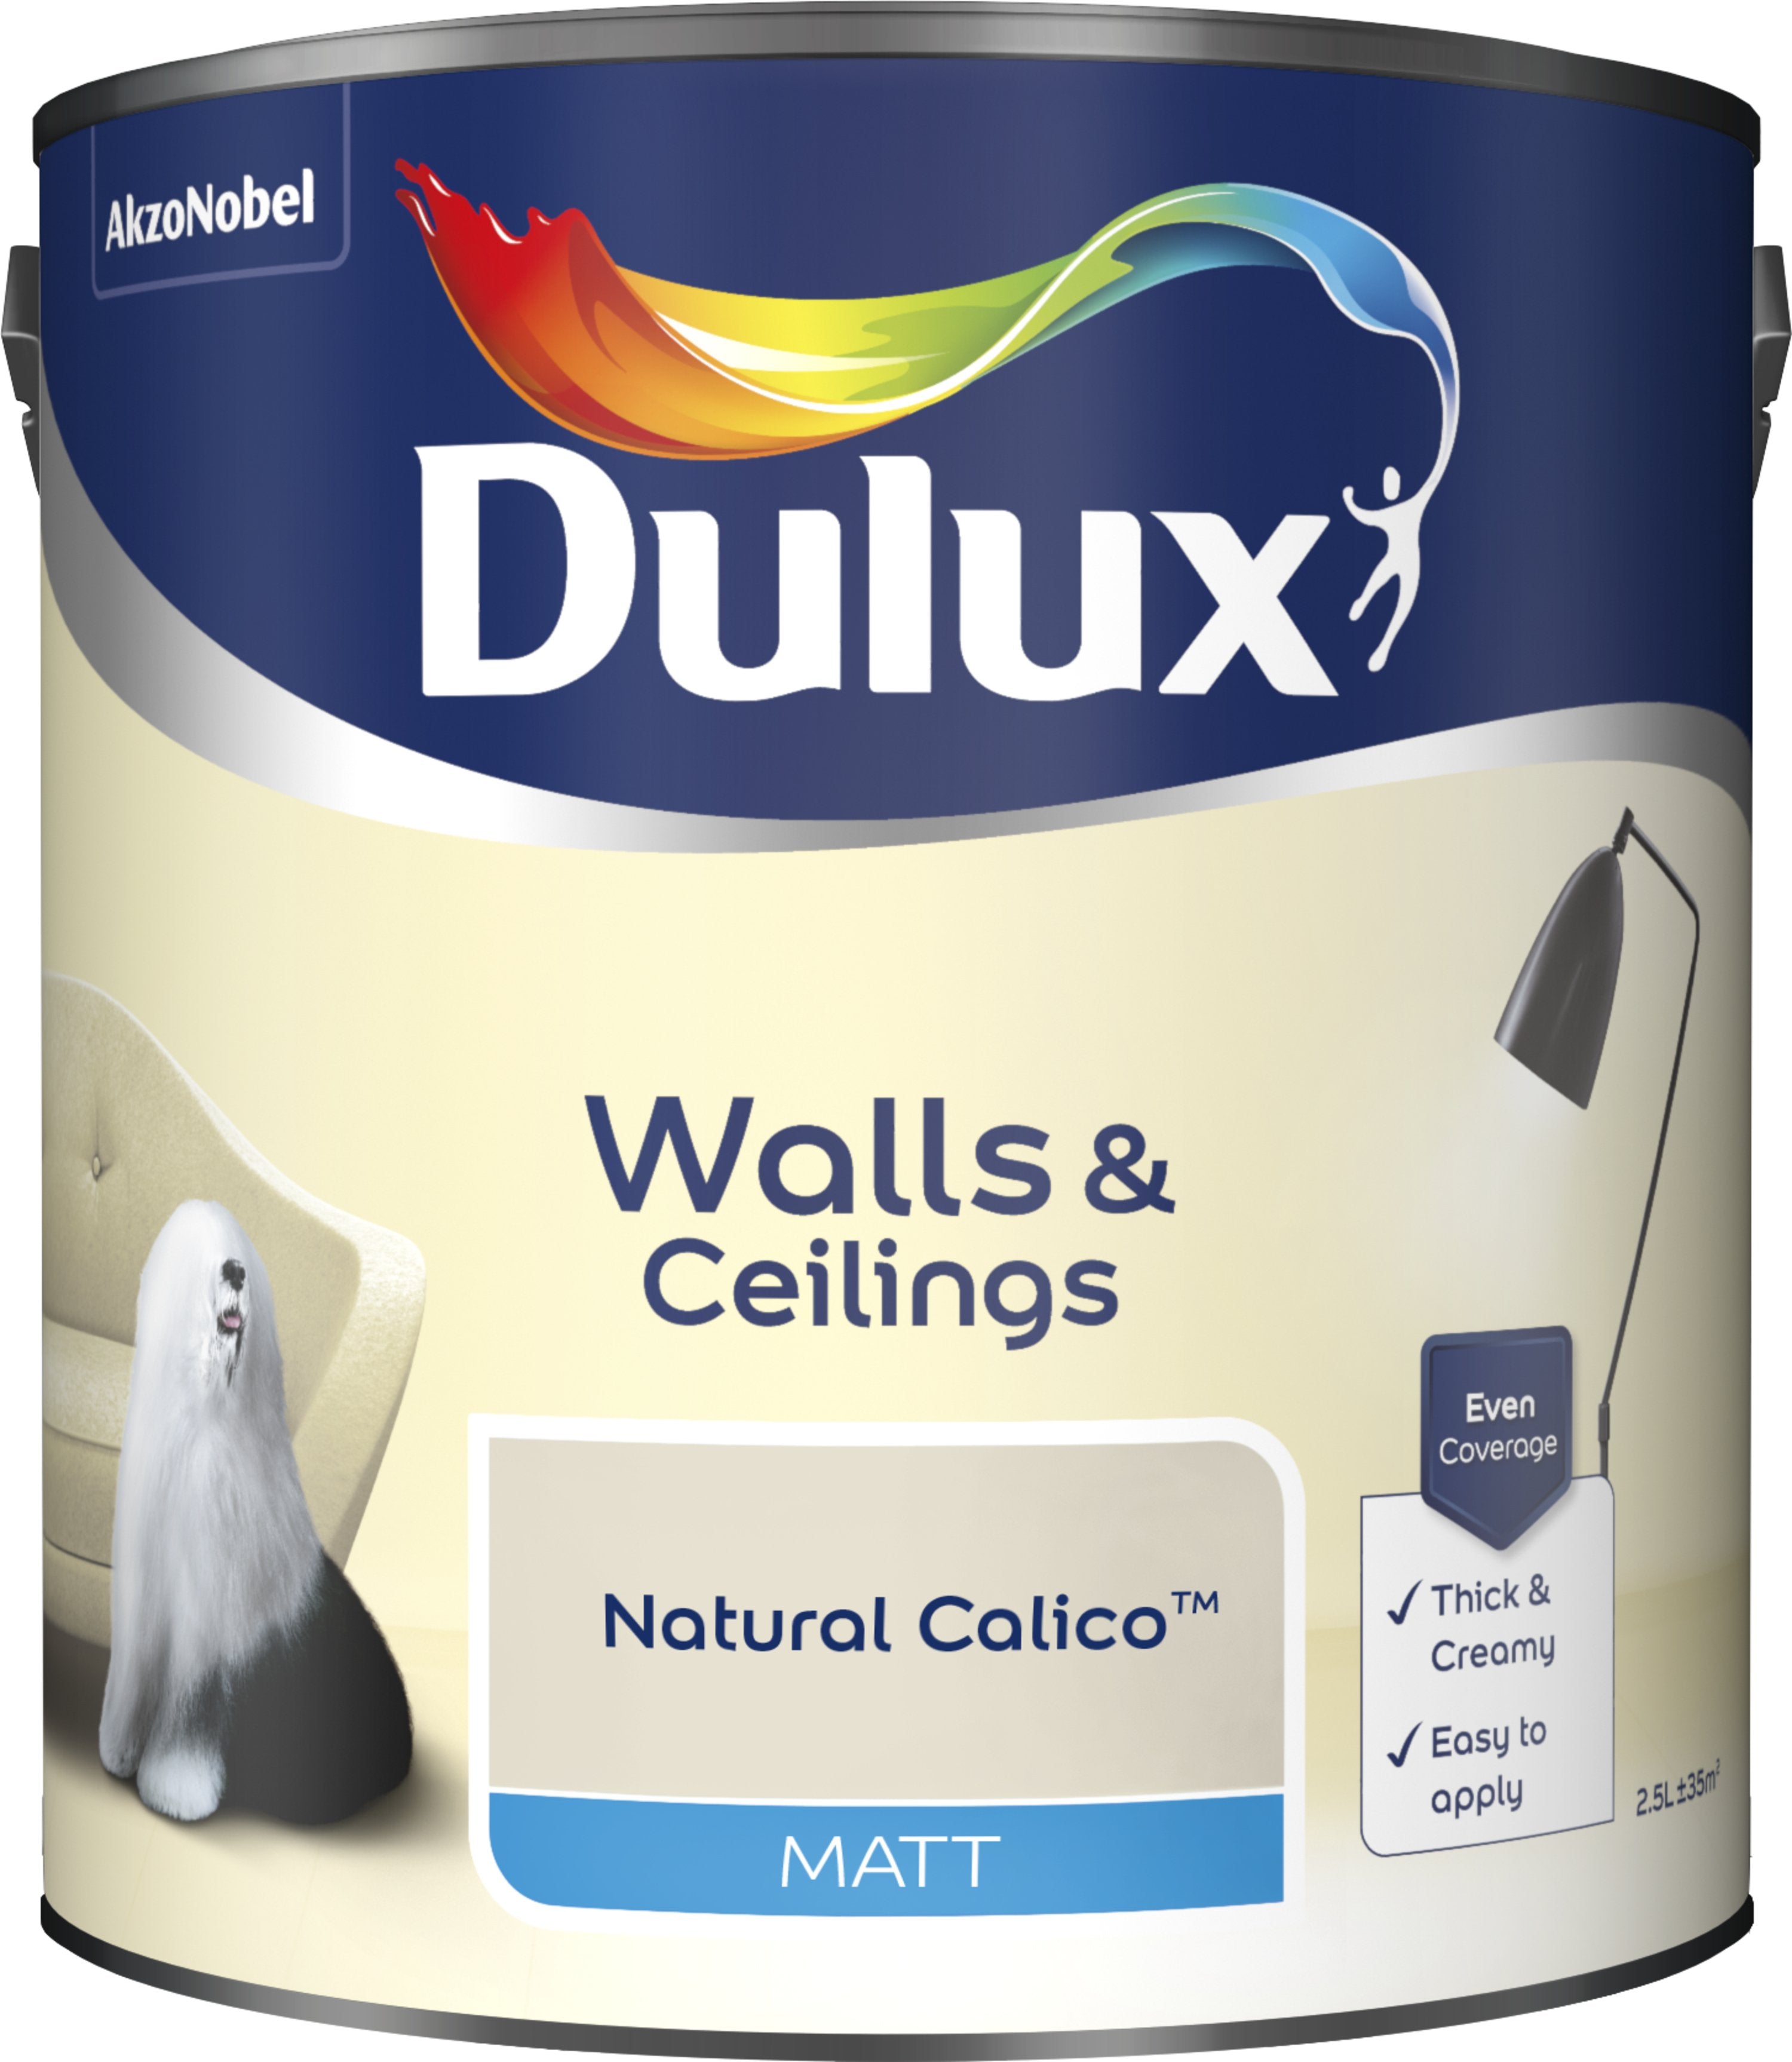 Dulux Matt Emulsion Paint For Walls And Ceilings - Natural Calico 2.5L Garden & Diy  Home